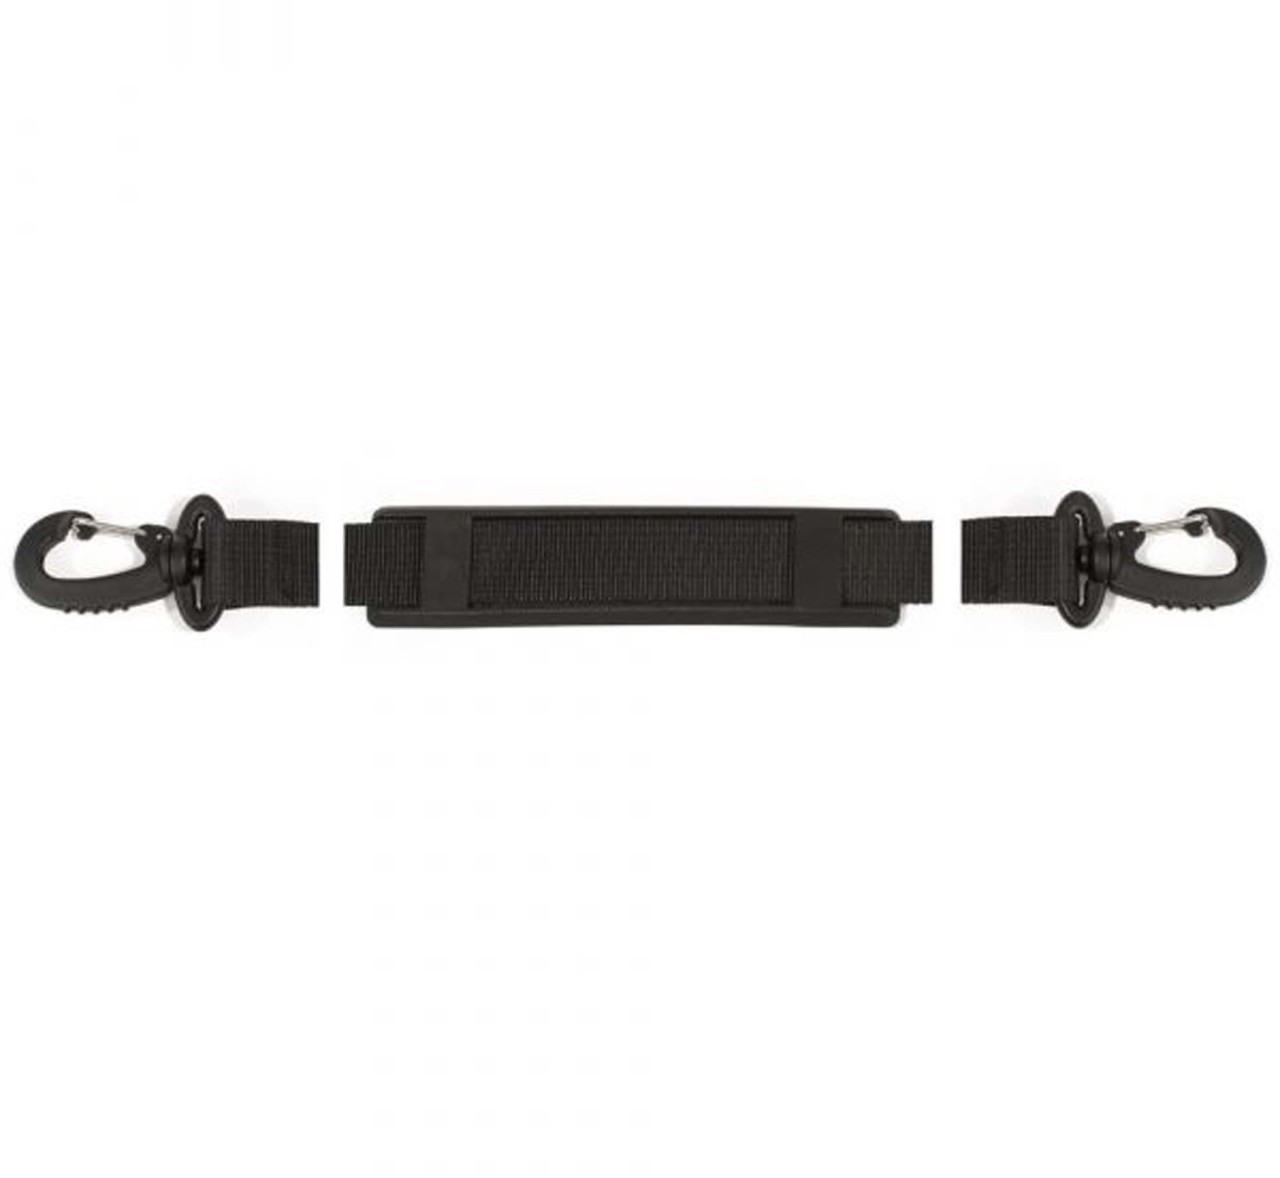 Ortlieb Carrying strap with carabiner 145 cm black